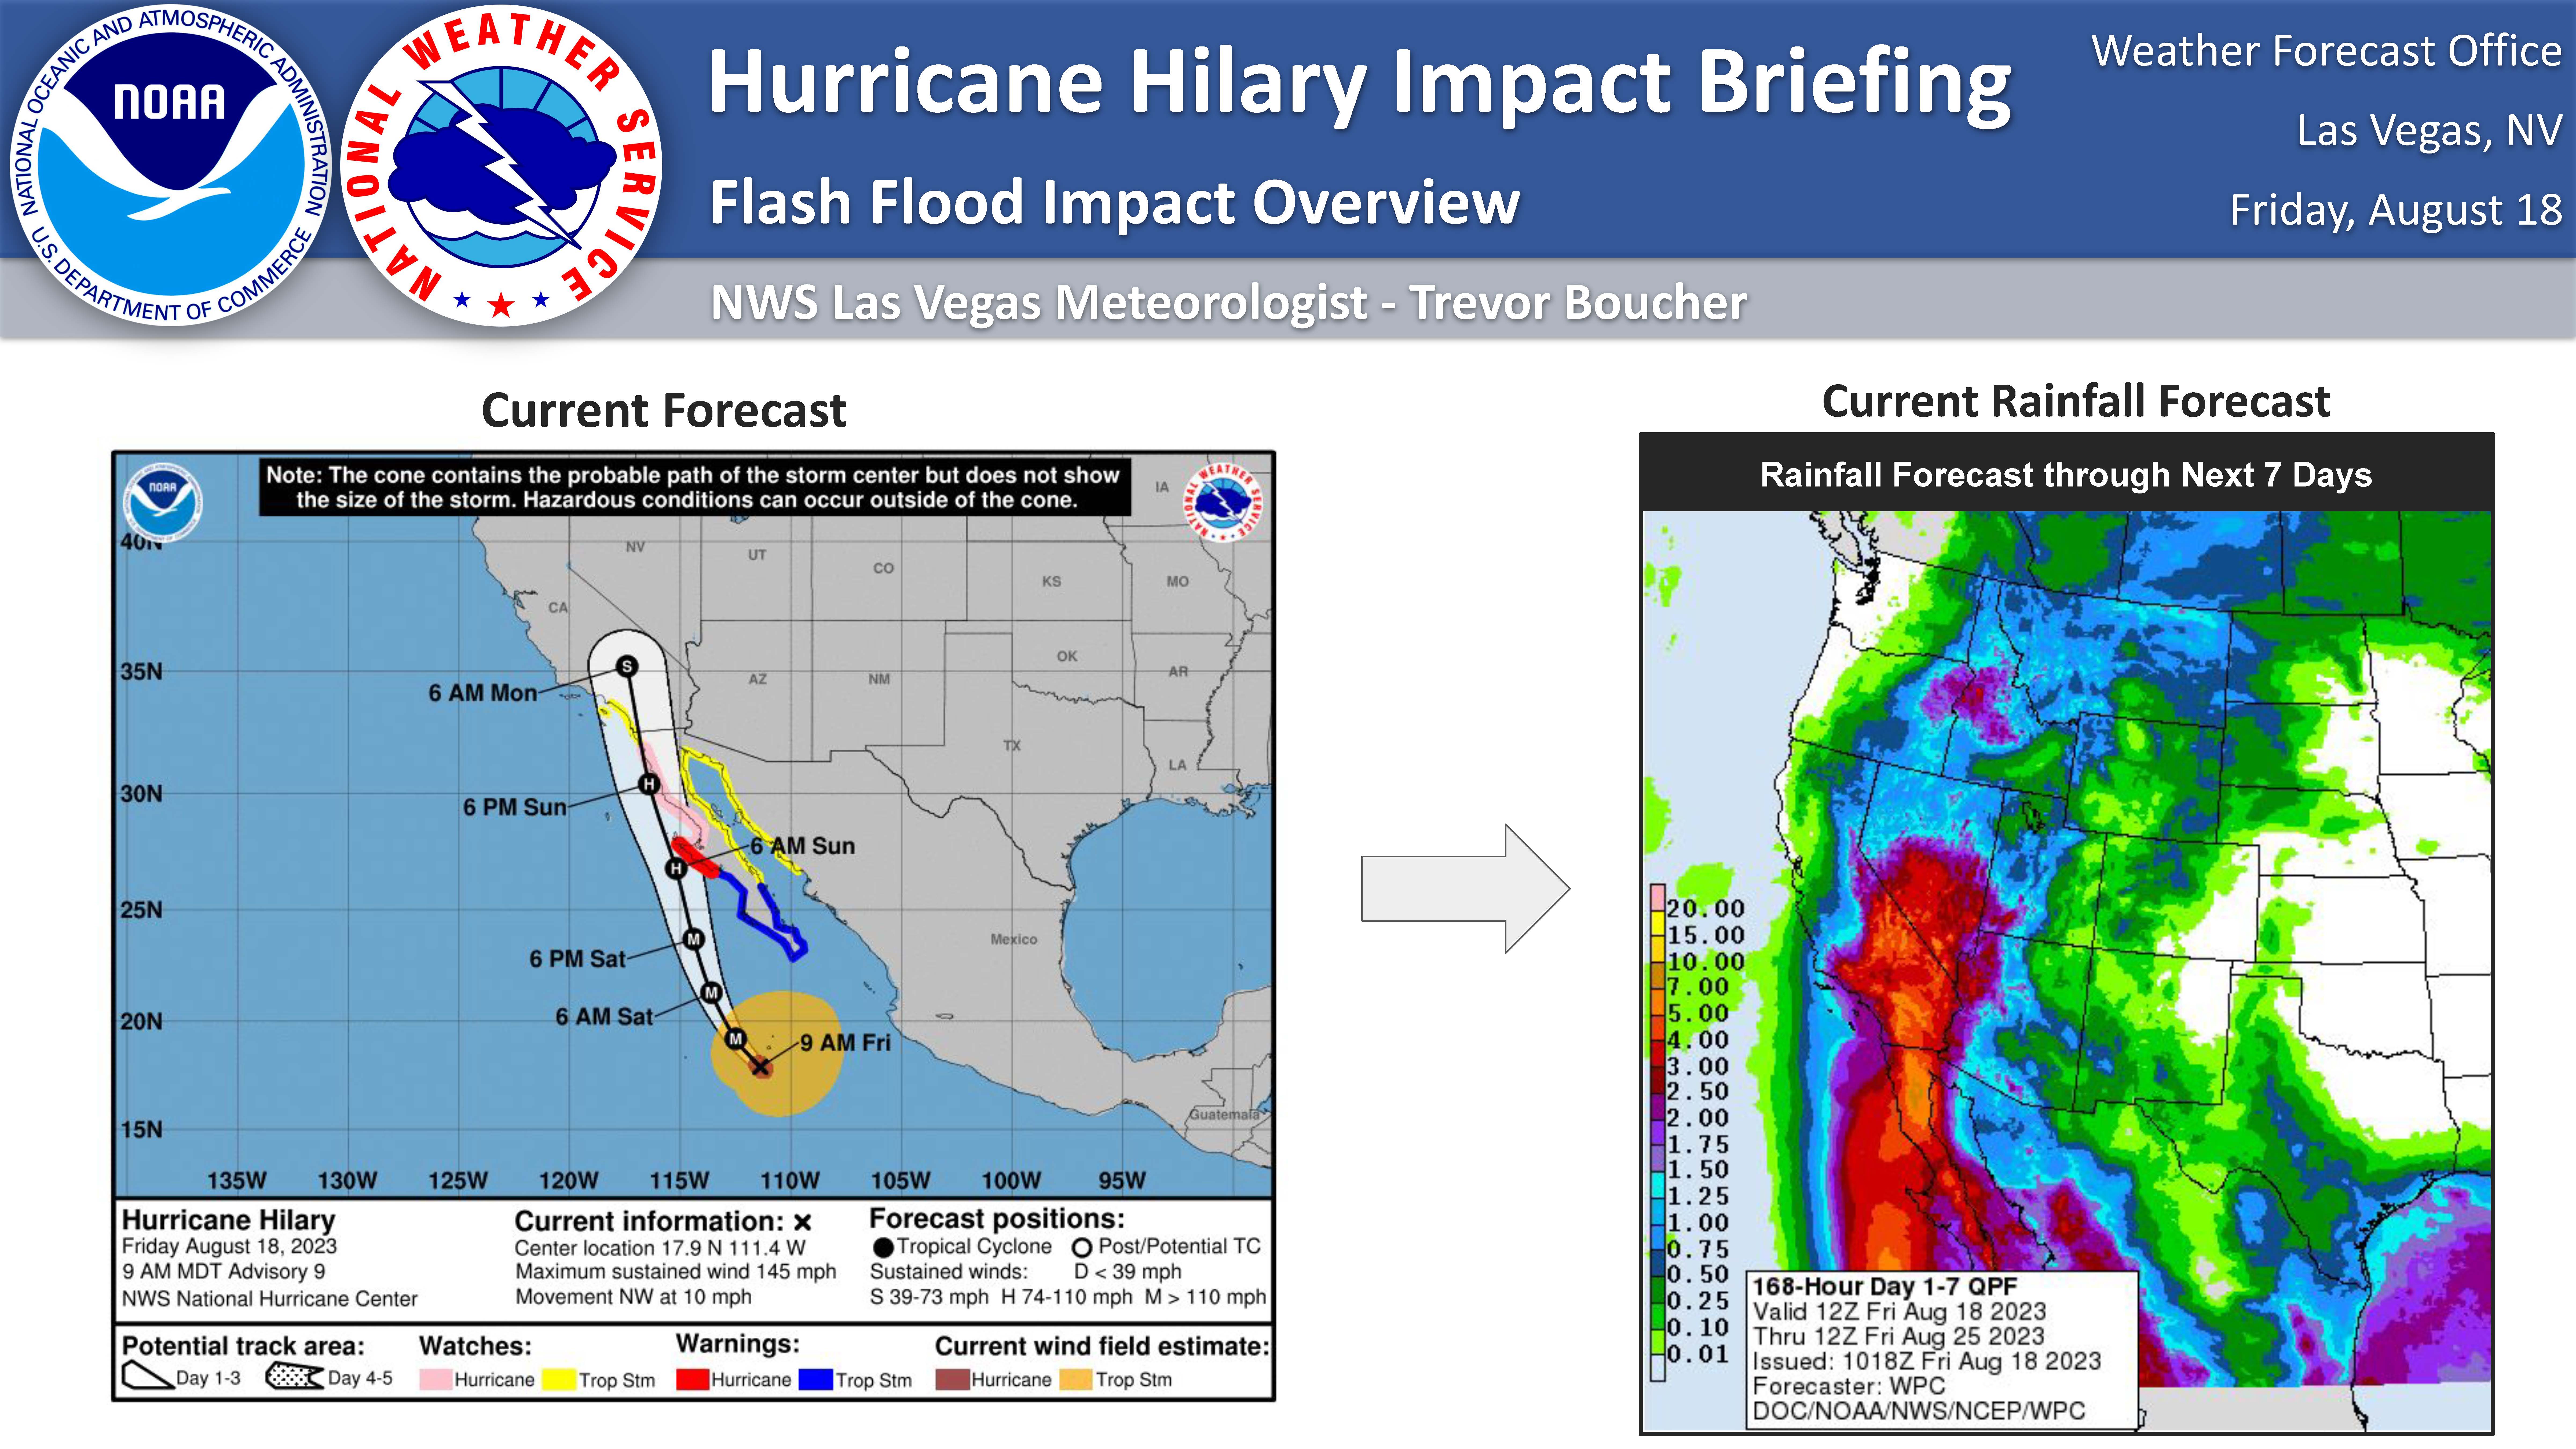 Forecast maps for next 7 days fro Hurricane Hilary Impact with storm track and rainfall amount forecast